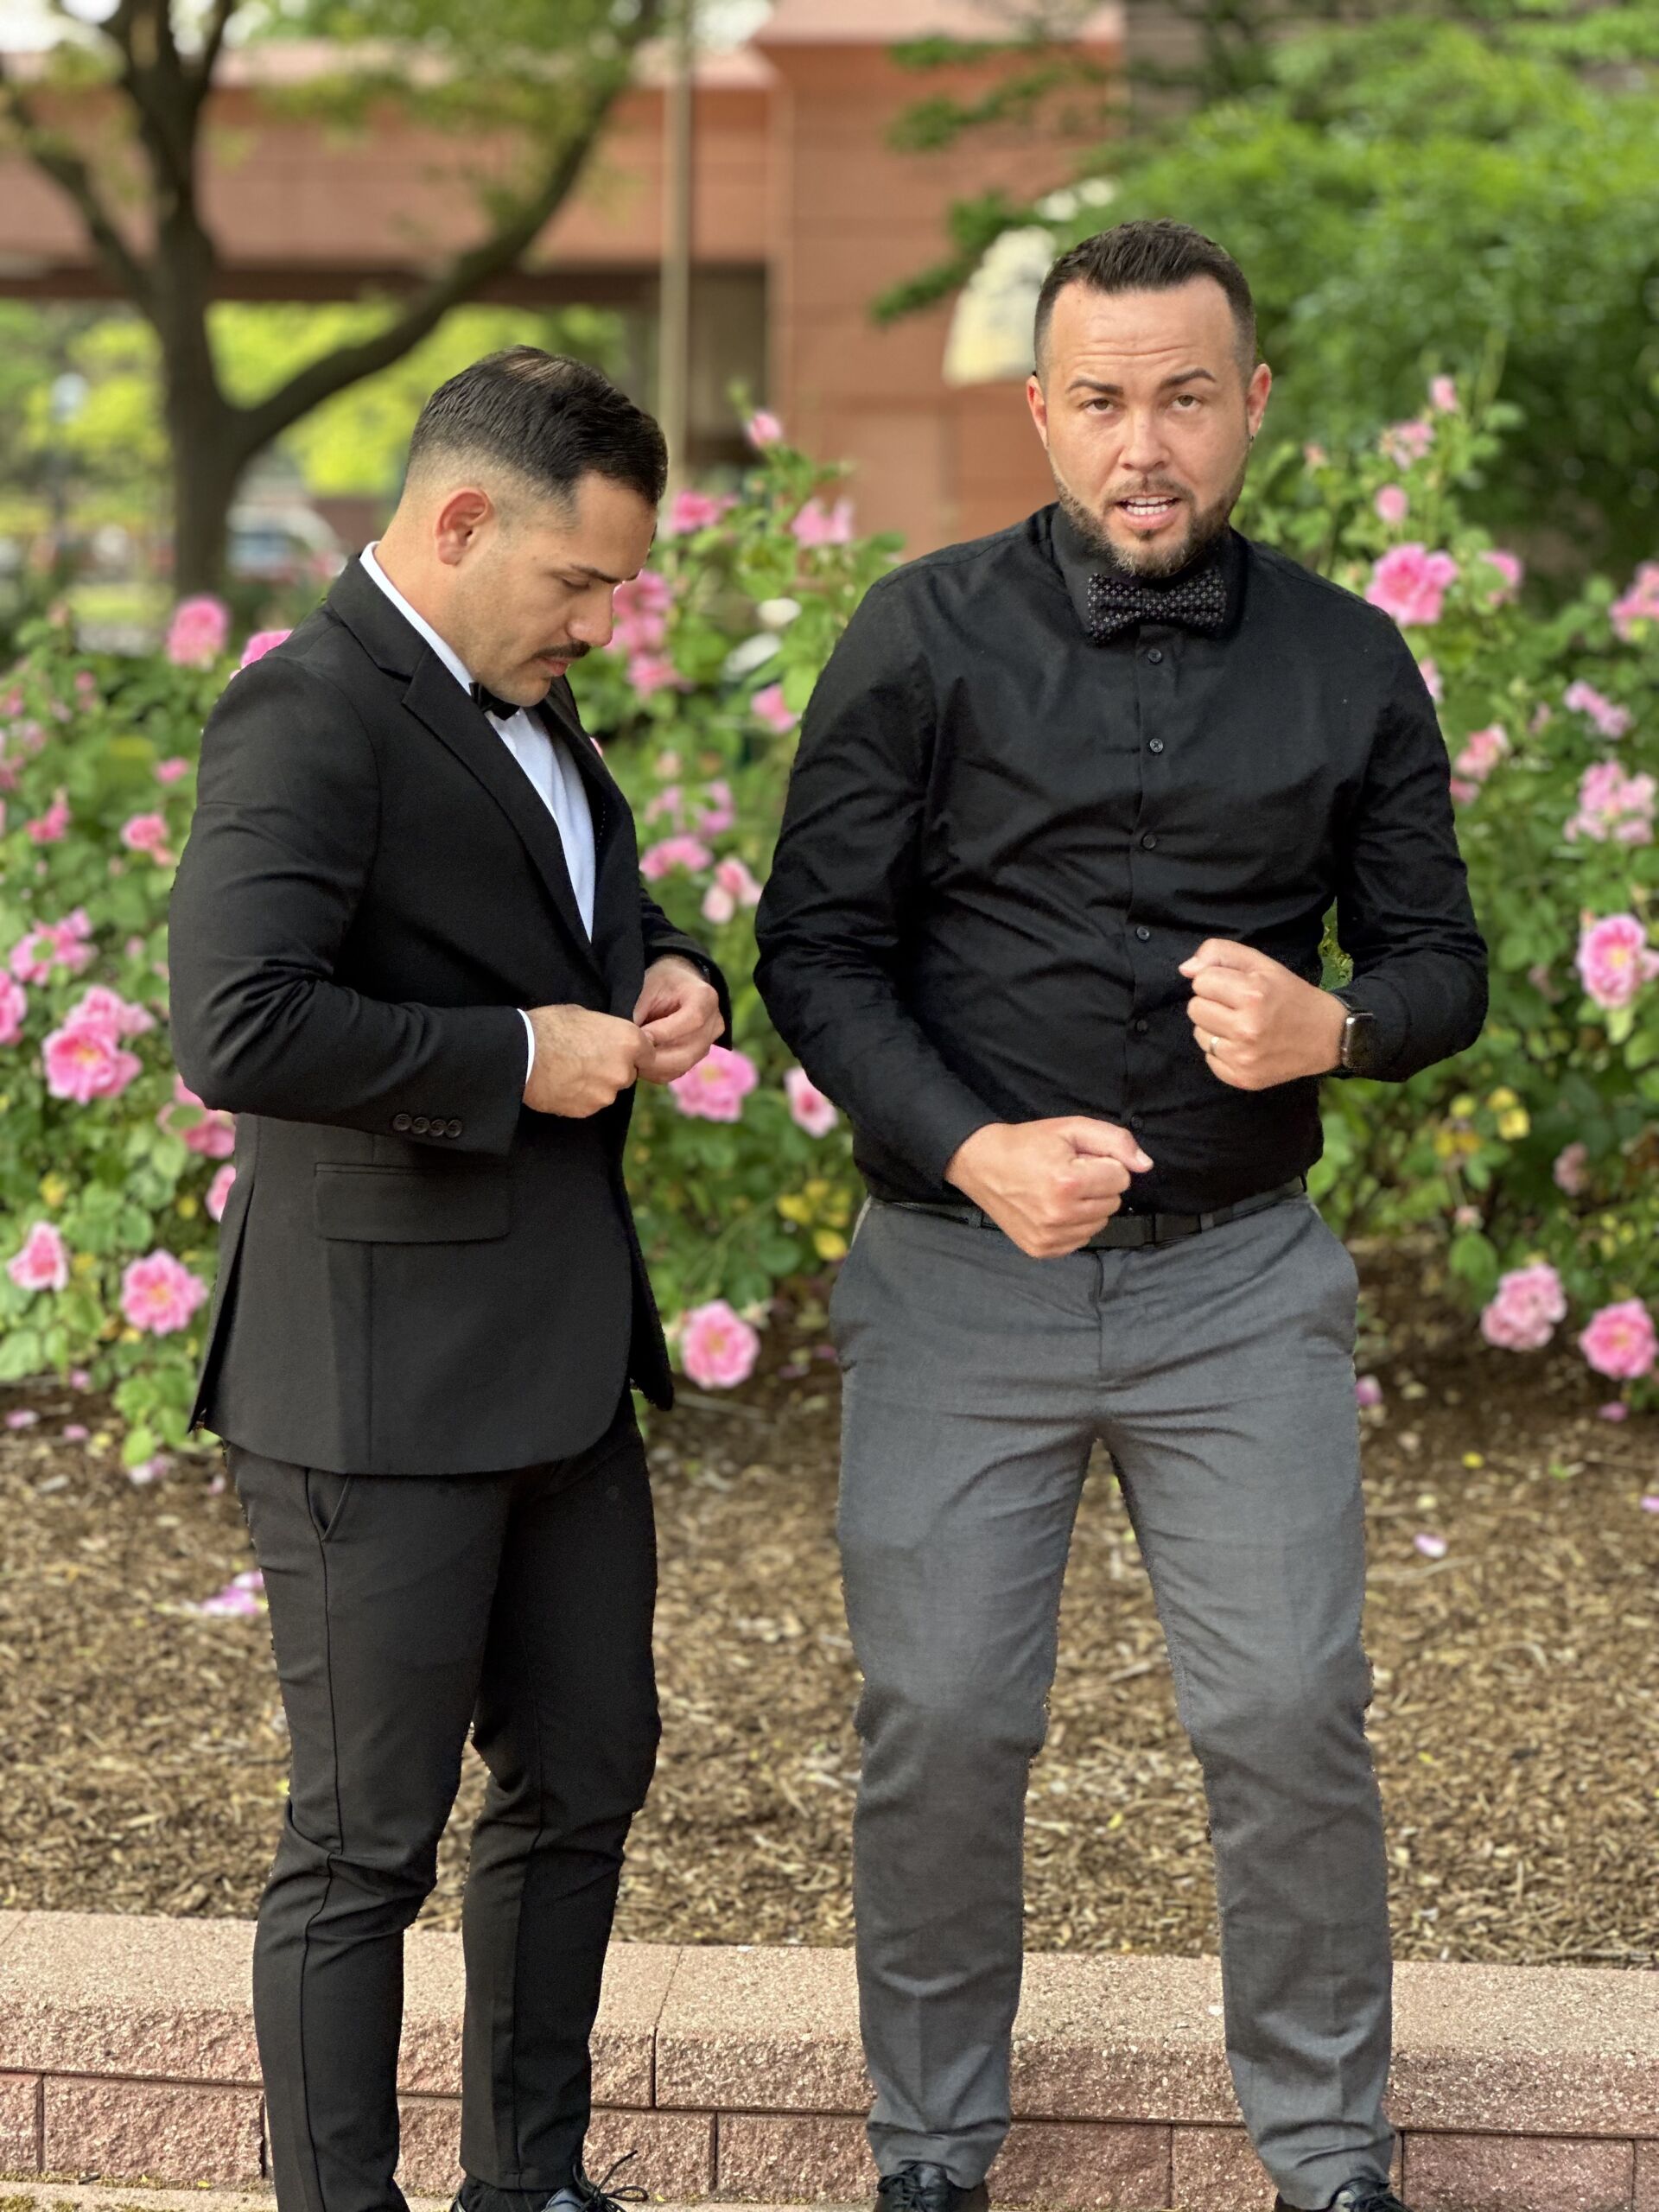 Photo shows a picture of Chase Johnson-Espinoza at his wedding. He is standing, looking like he's ready to dance, in front of a patch of flowers outside, alongside another person in formal wear. He is wearing a black long-sleeve button up with gray slacks and a black bowtie with white dots.